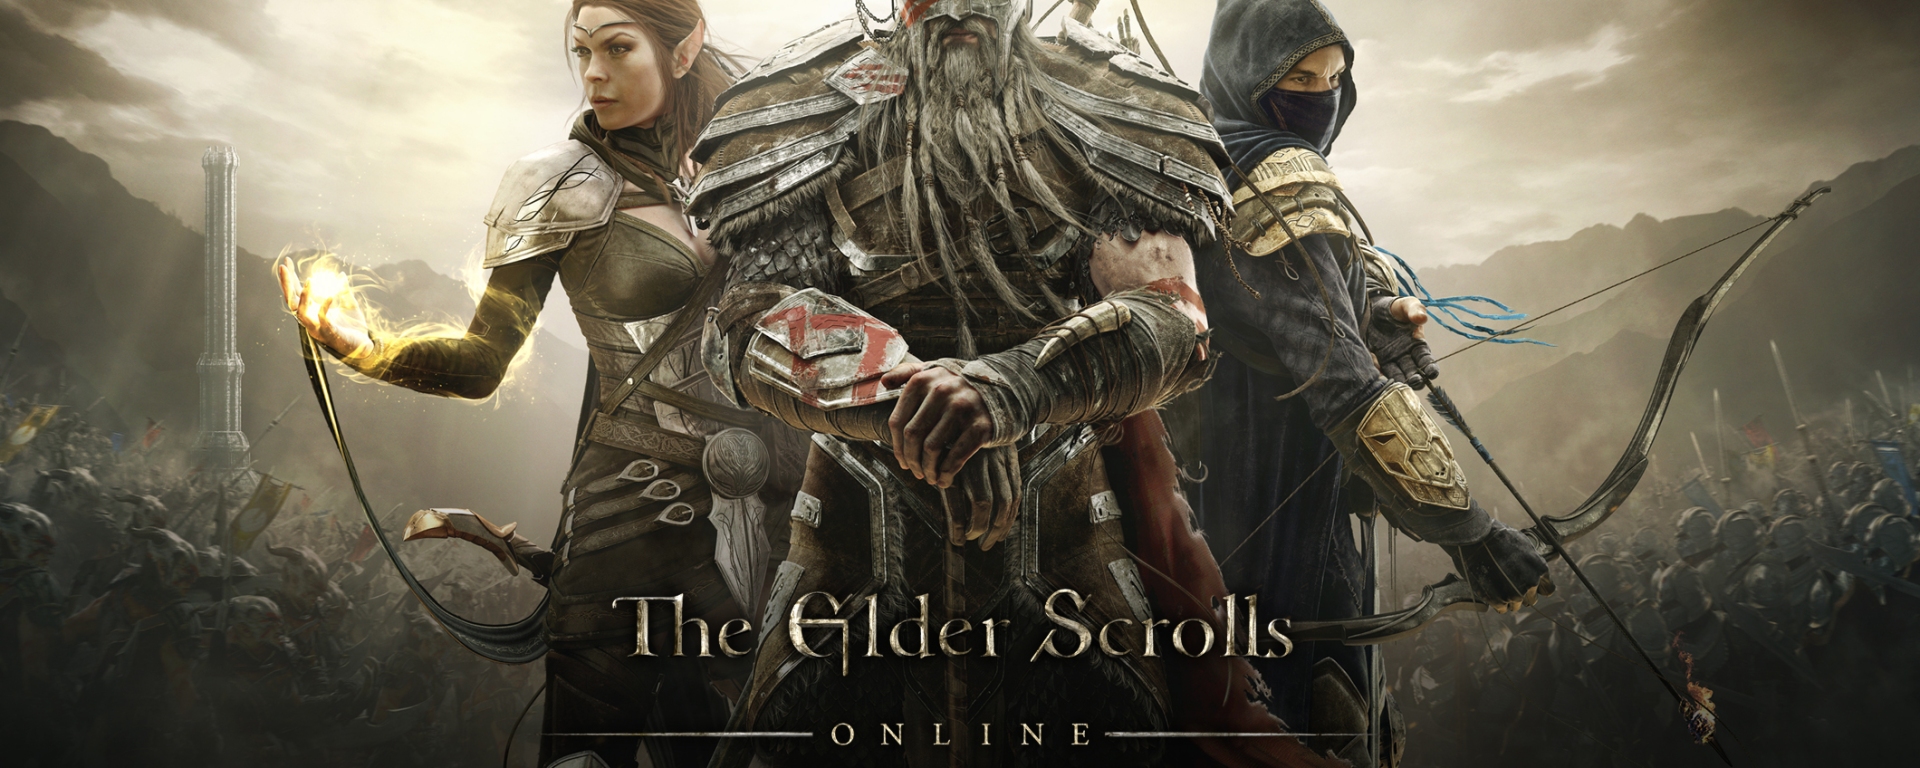 Now For Tamriel 4 Playstation® And Elder Scrolls® Xbox Online: The One Available Unlimited™